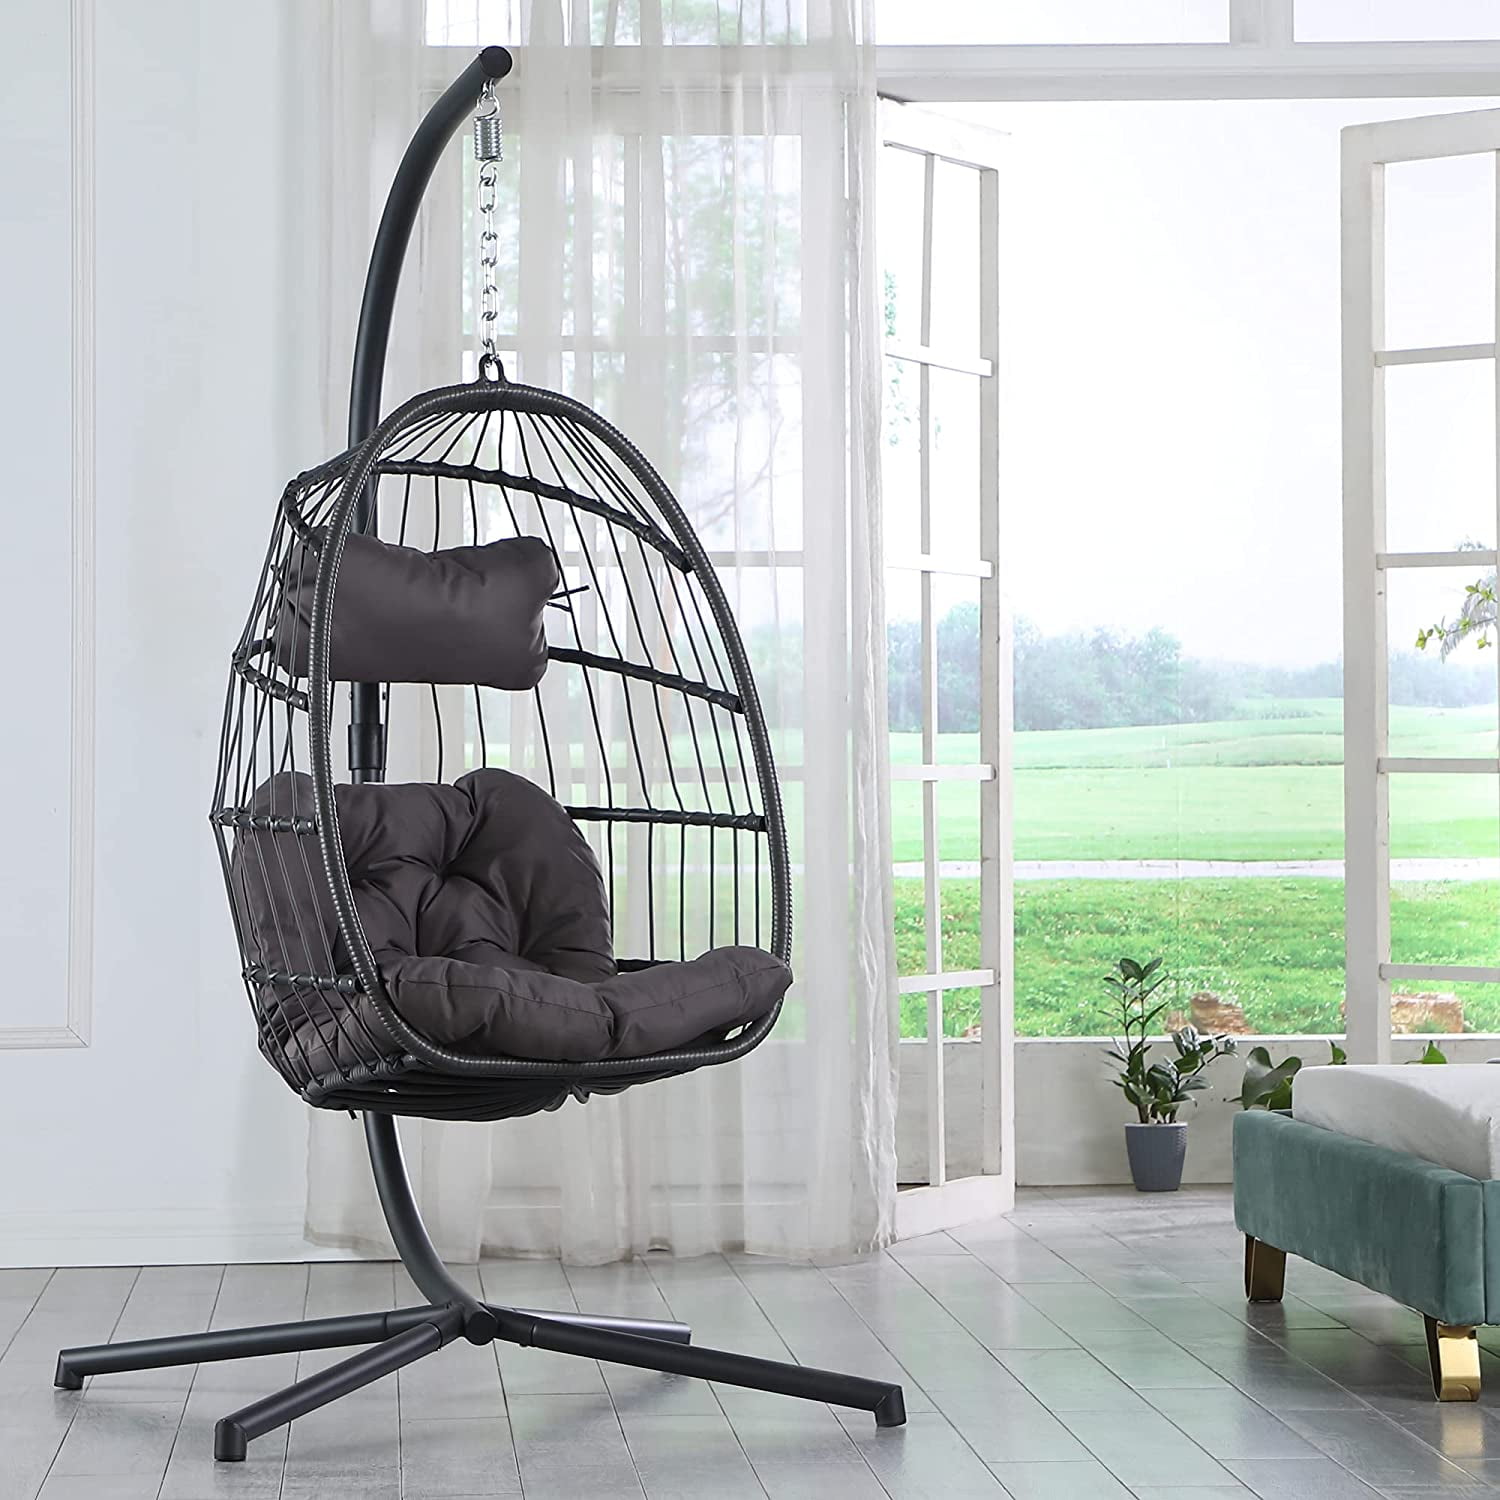 Indoor Hanging Swing Chair With Cushion Safety Rocking Seat Home Decoration A+ 